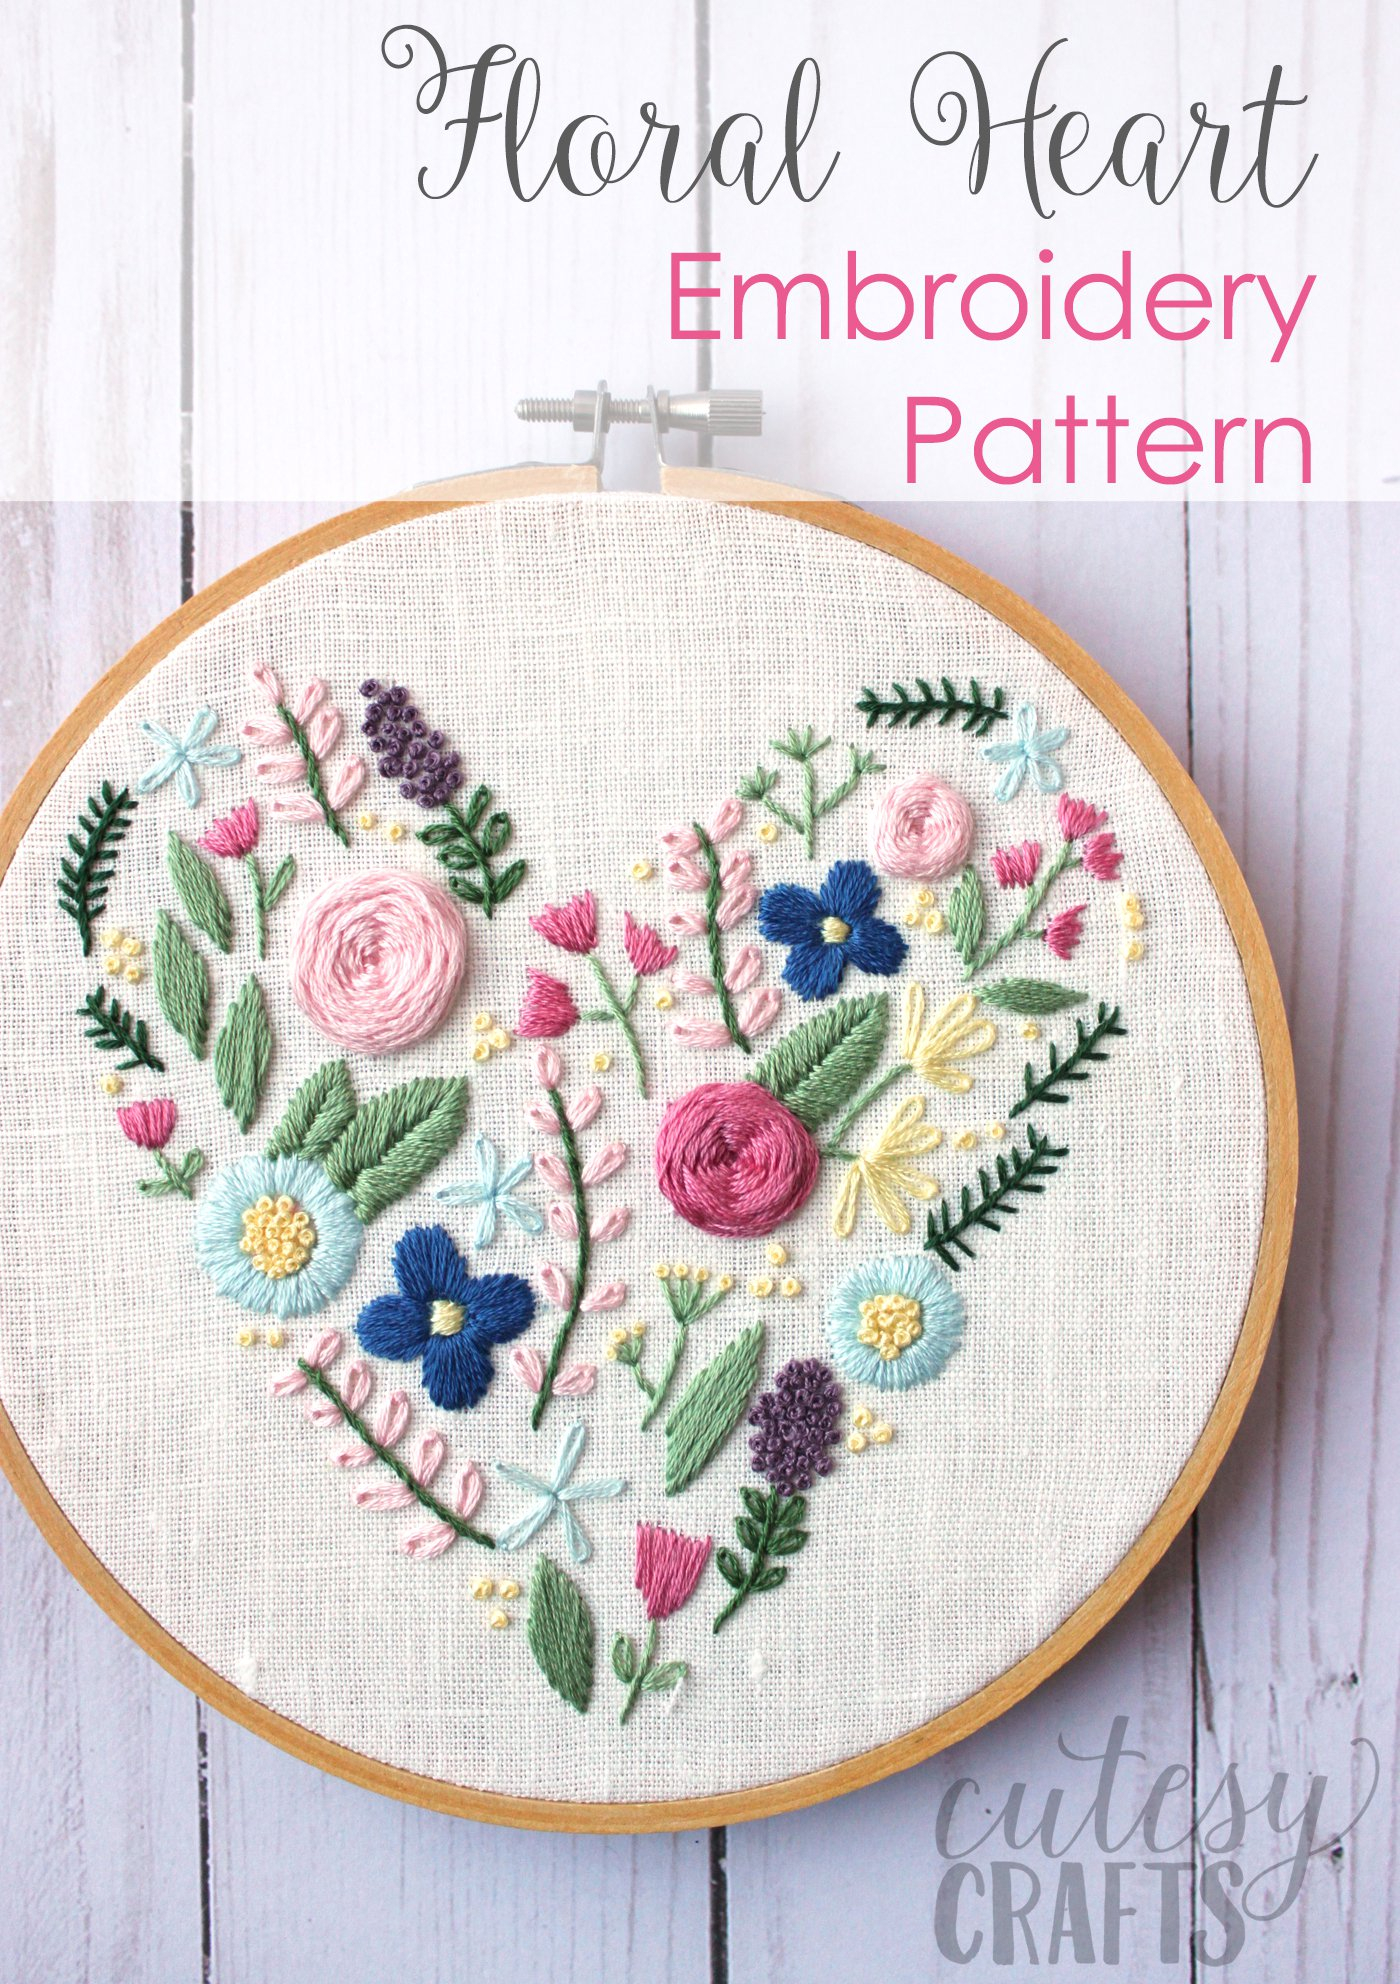 Hand Stitch Embroidery Patterns Free Floral Heart Hand Embroidery Pattern The Polka Dot Chair